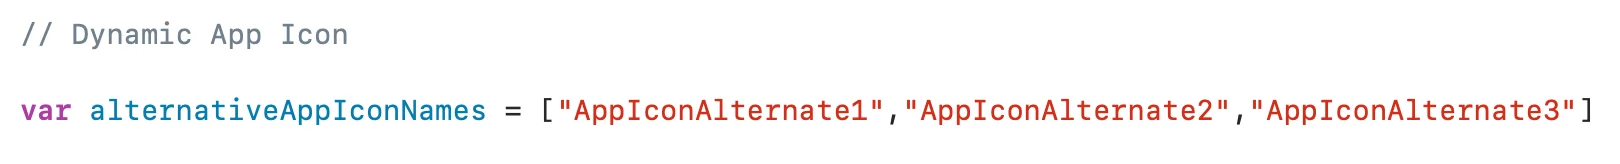 Use this variable in Config to edit the alternative app icon file names.